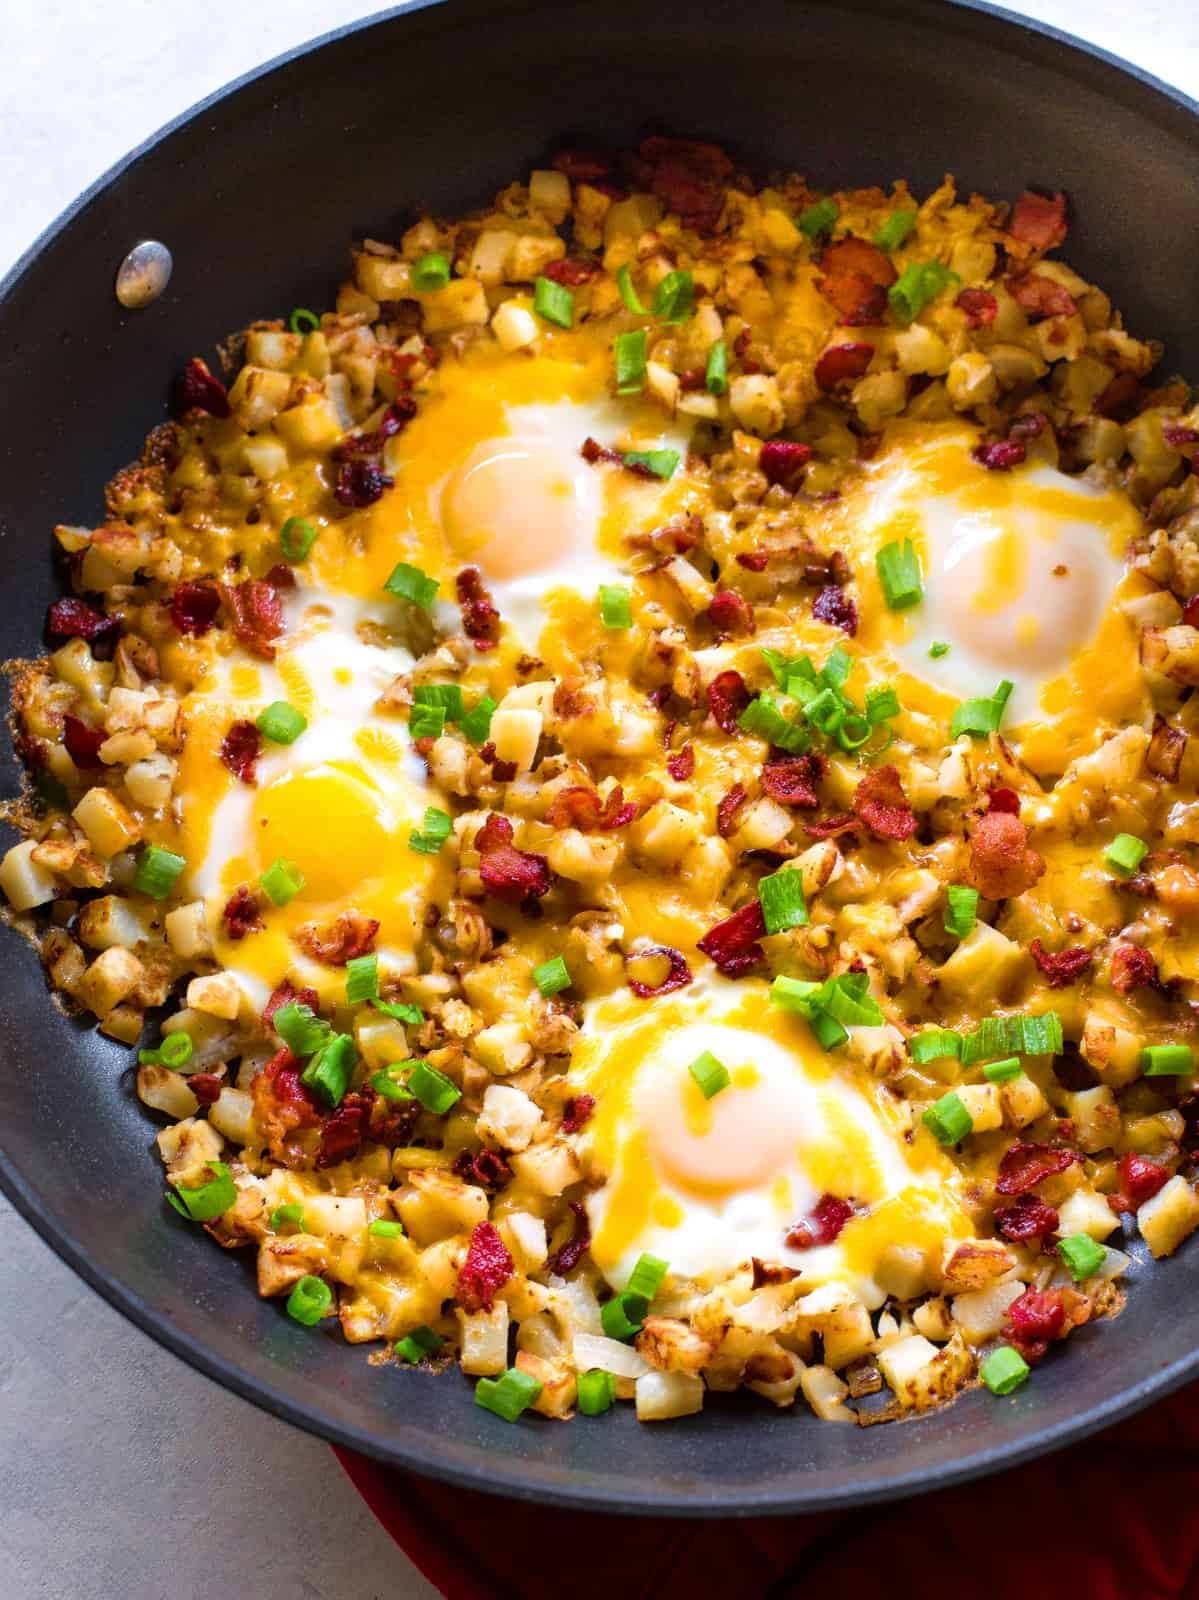 Bacon, Egg, and Potato Breakfast Skillet - The Girl Who Ate Everything